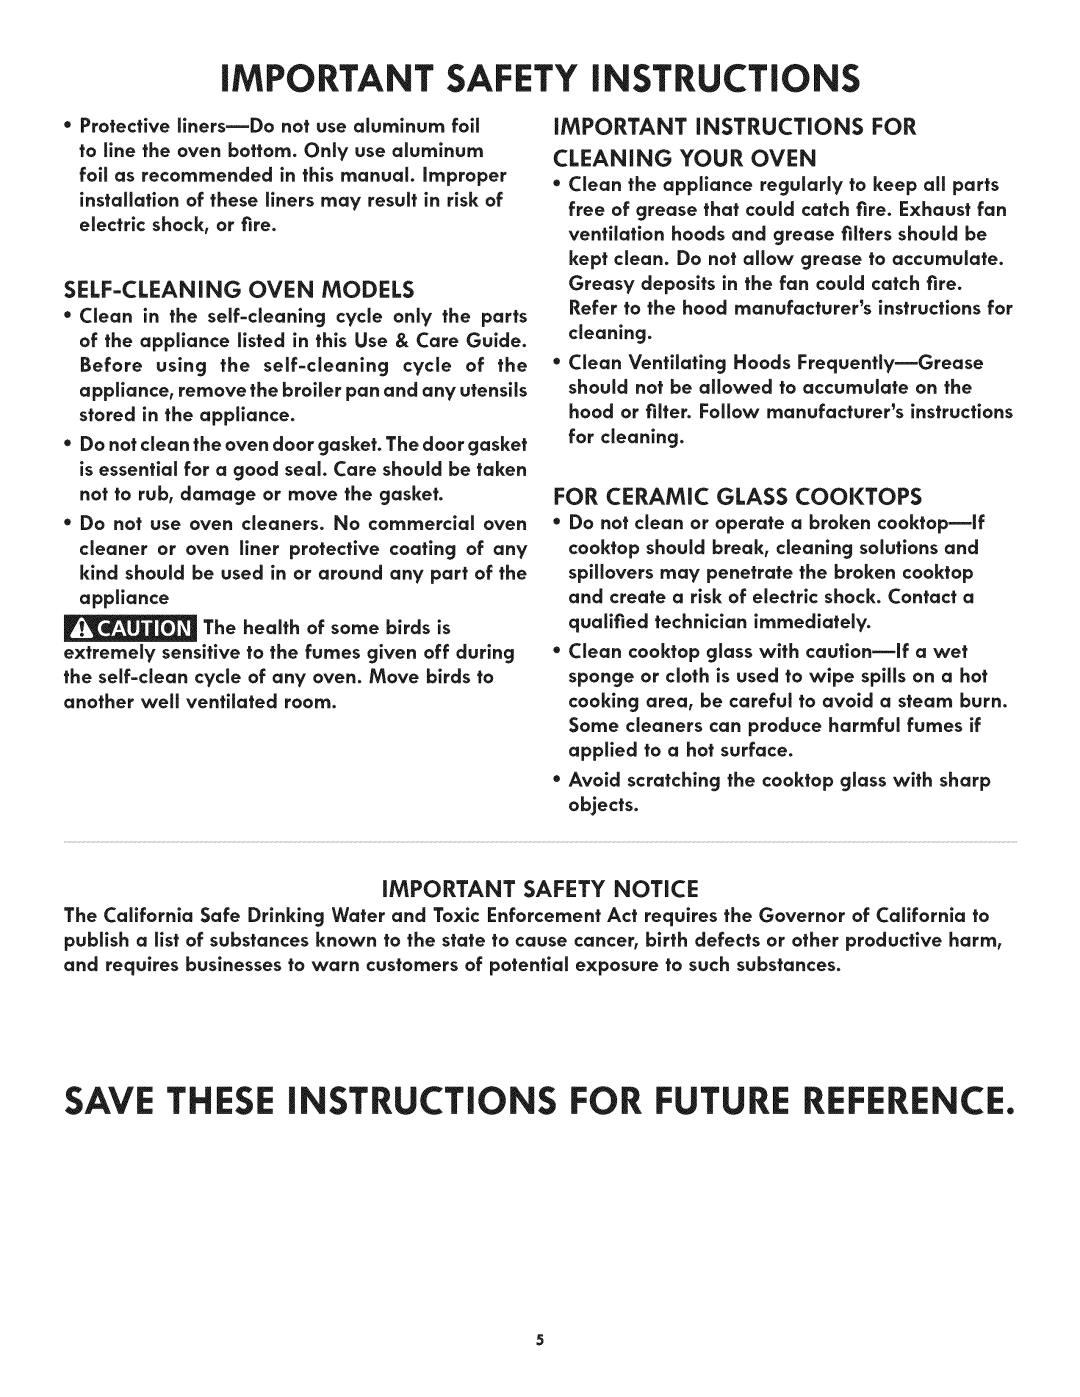 Kenmore 790.9805 SAVE THESE iNSTRUCTiONS FOR FUTURE REFERENCE, iMPORTANT SAFETY iNSTRUCTiONS, Self-Cleaning Oven Models 